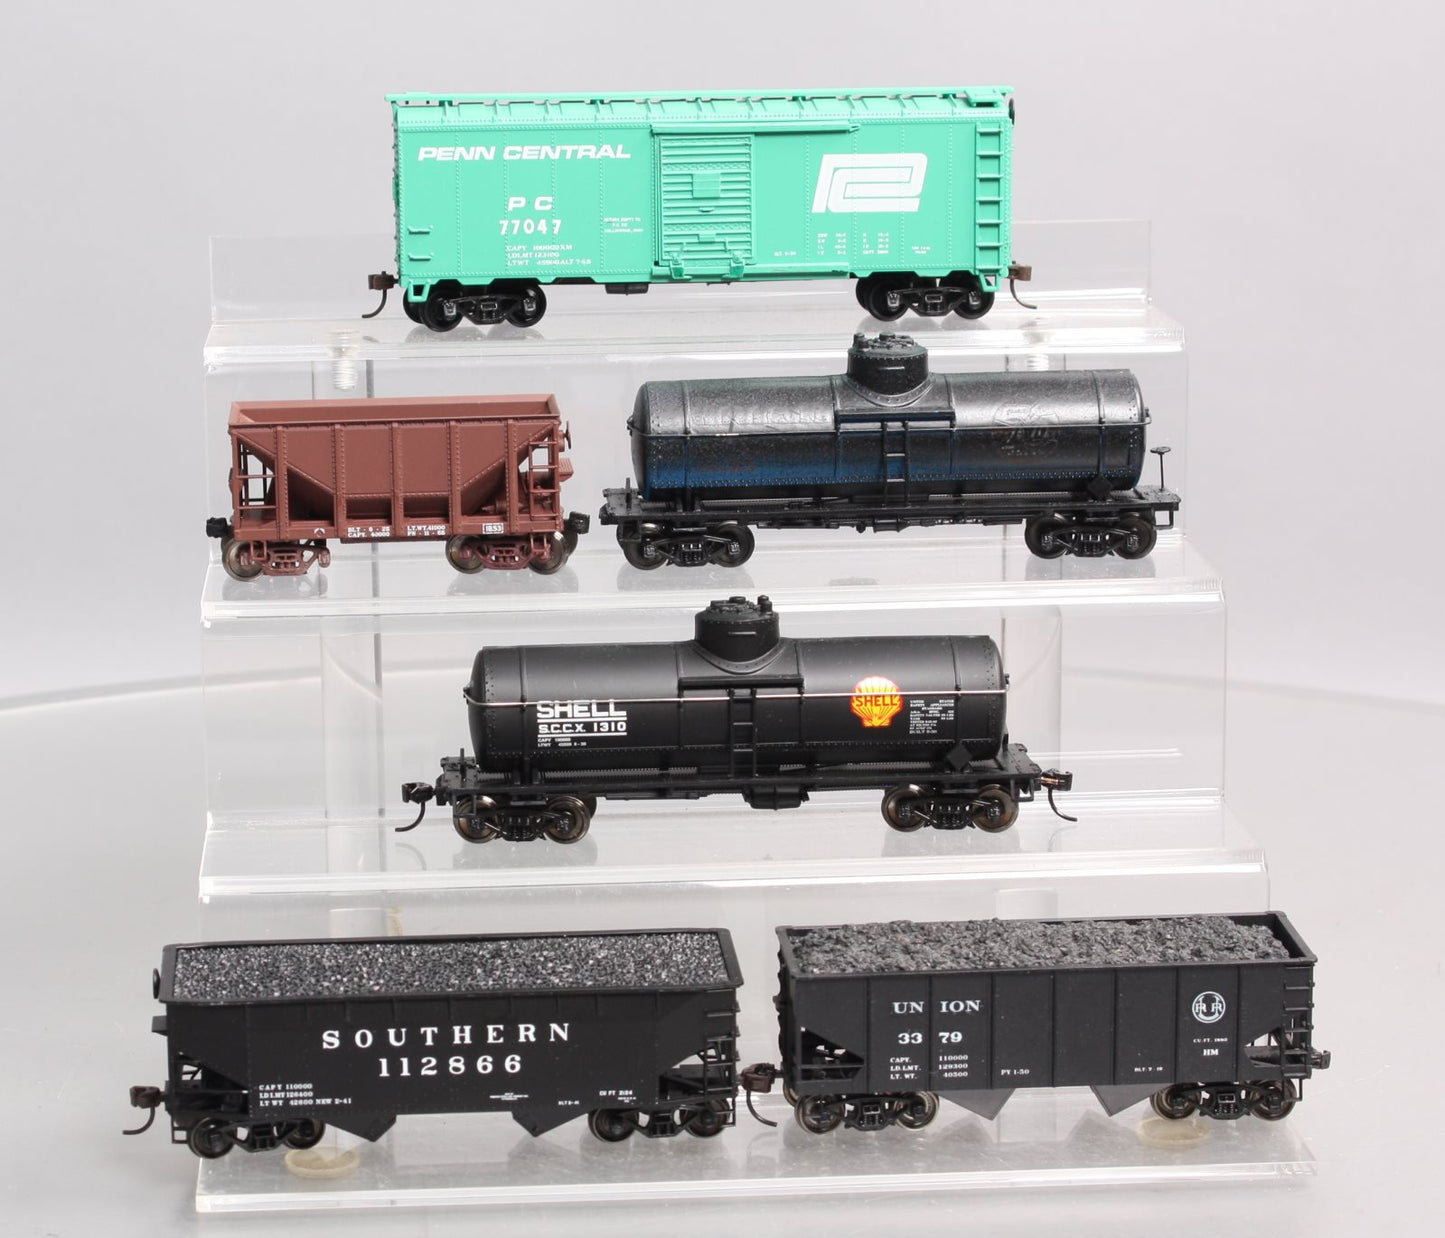 Walthers & Other HO Assorted Freight Cars: 1310, 112866, 77047, 81718, 3379 [6] VG